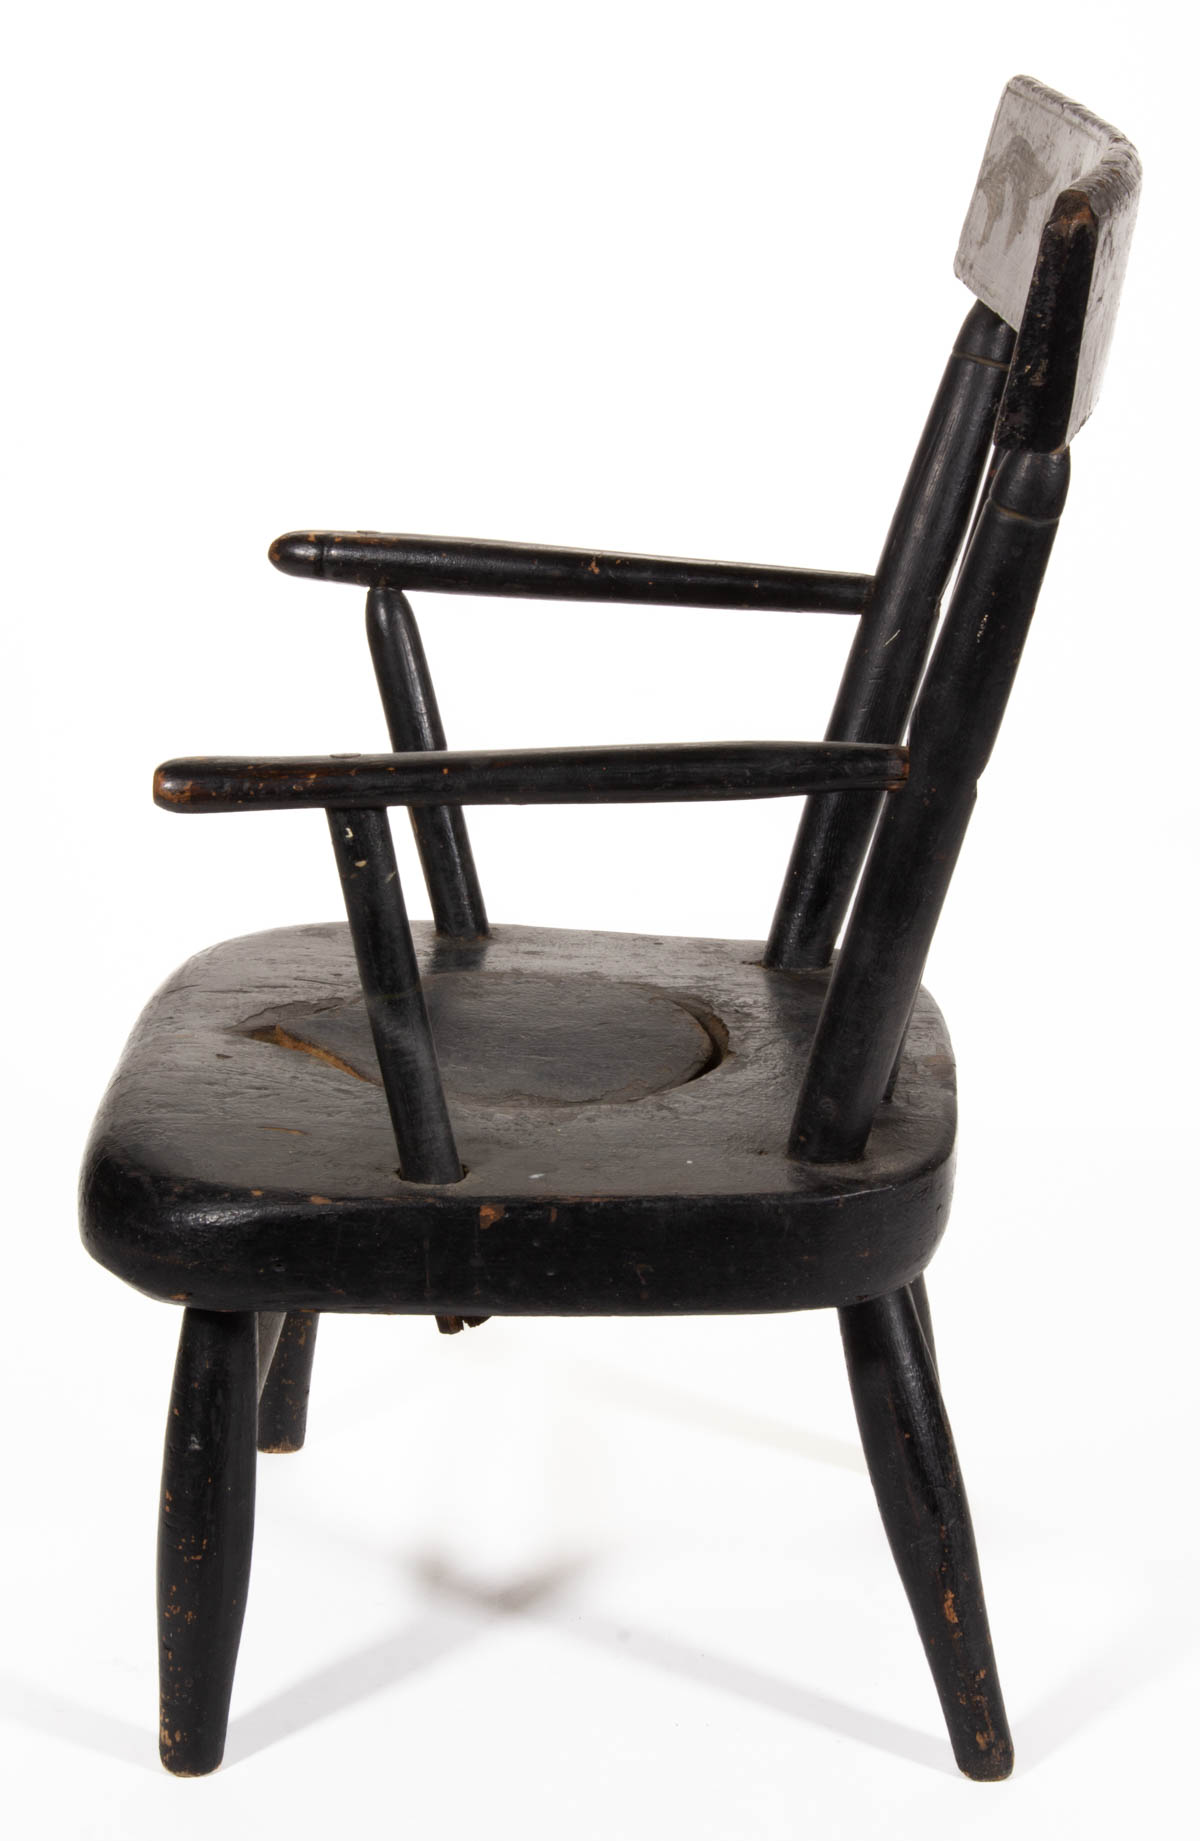 HAMPSHIRE COUNTY, VIRGINIA (NOW WEST VIRGINIA) PAINTED WINDSOR CHILD’S NECESSARY CHAIR